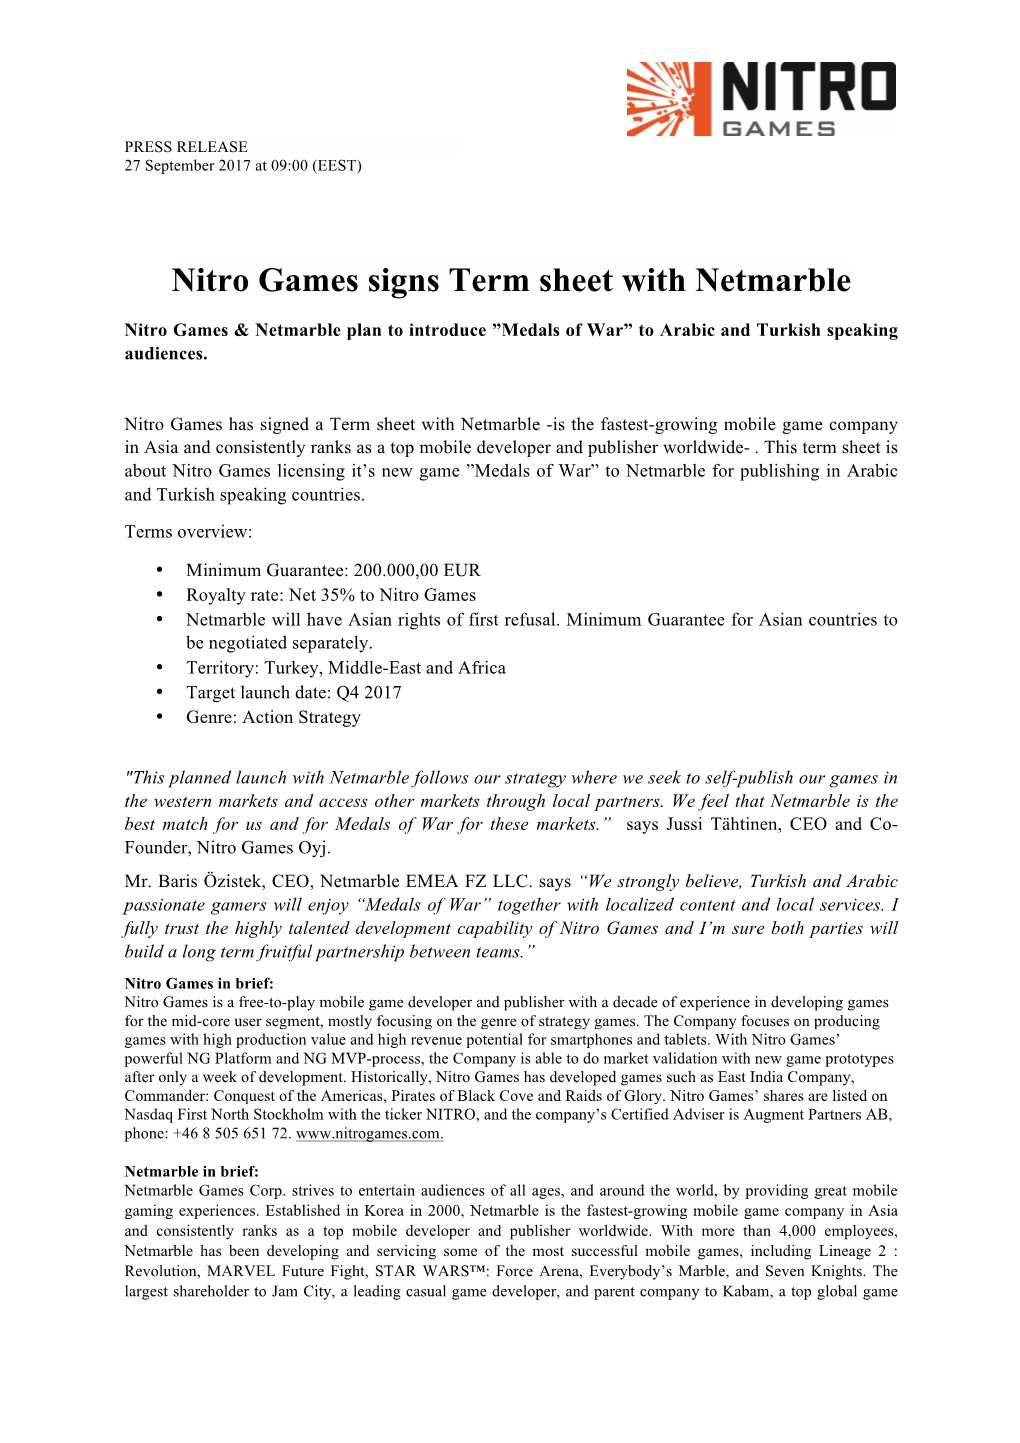 Nitro Games Signs Term Sheet with Netmarble